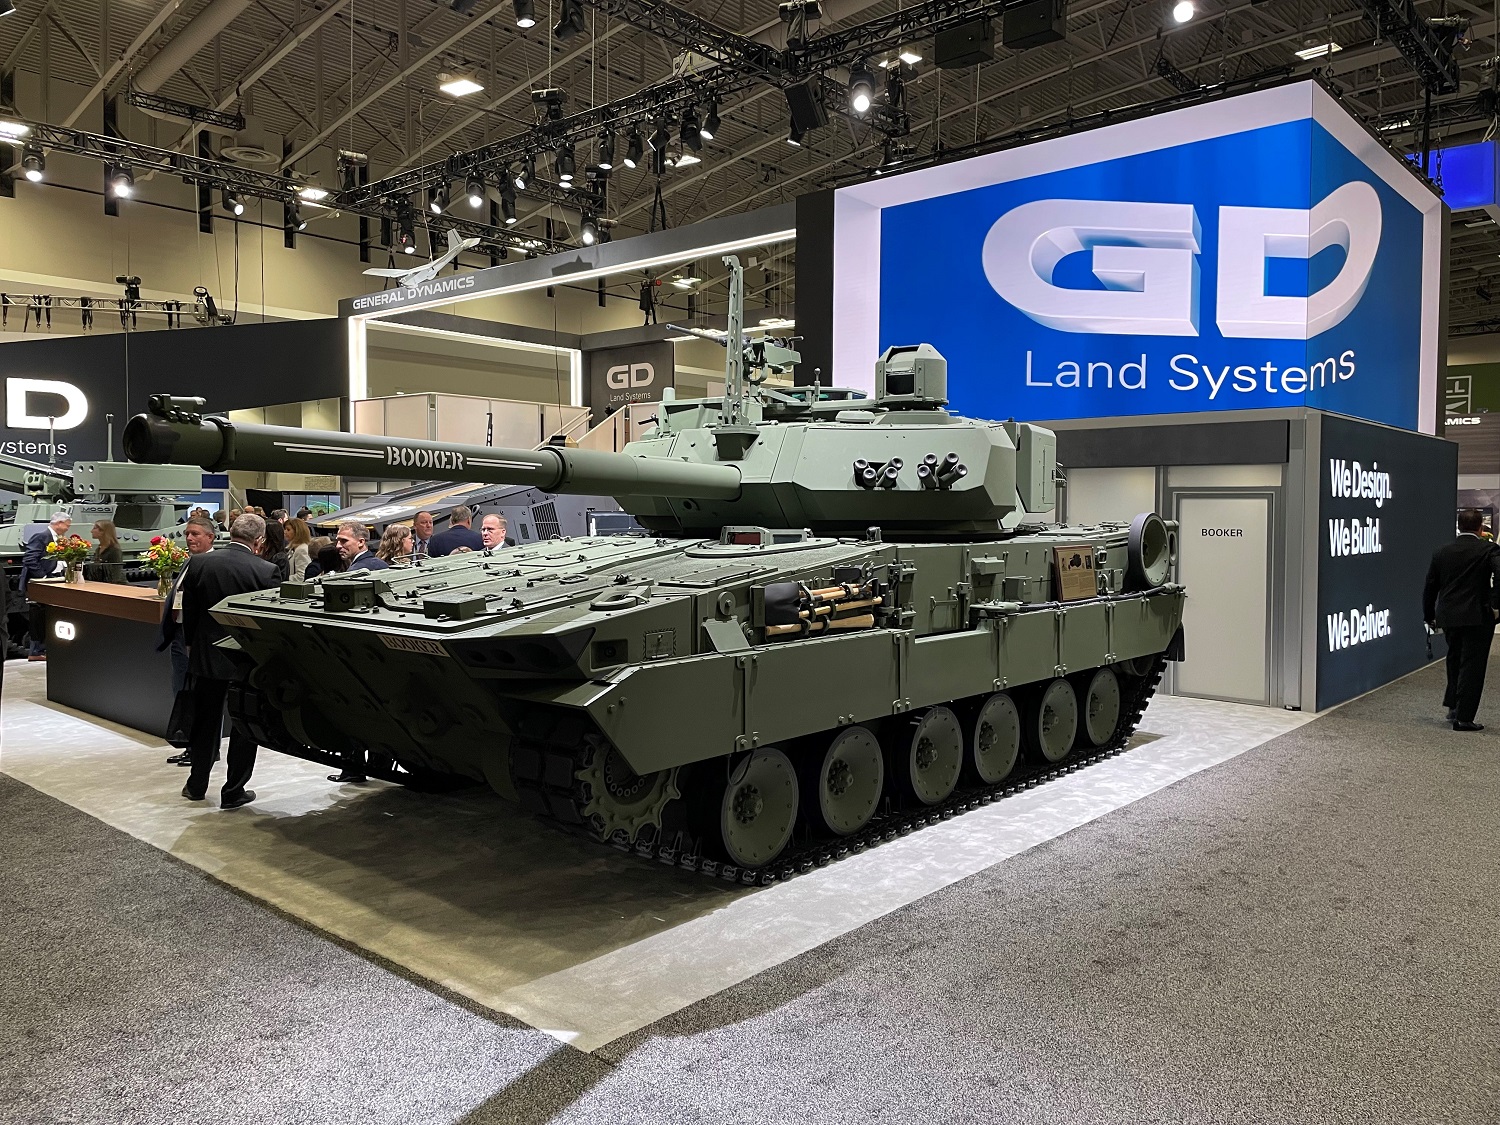 Rolls Royce Delivers First mtu 8V 199 Powerpacks for US Army M10 Booker Combat Vehicle